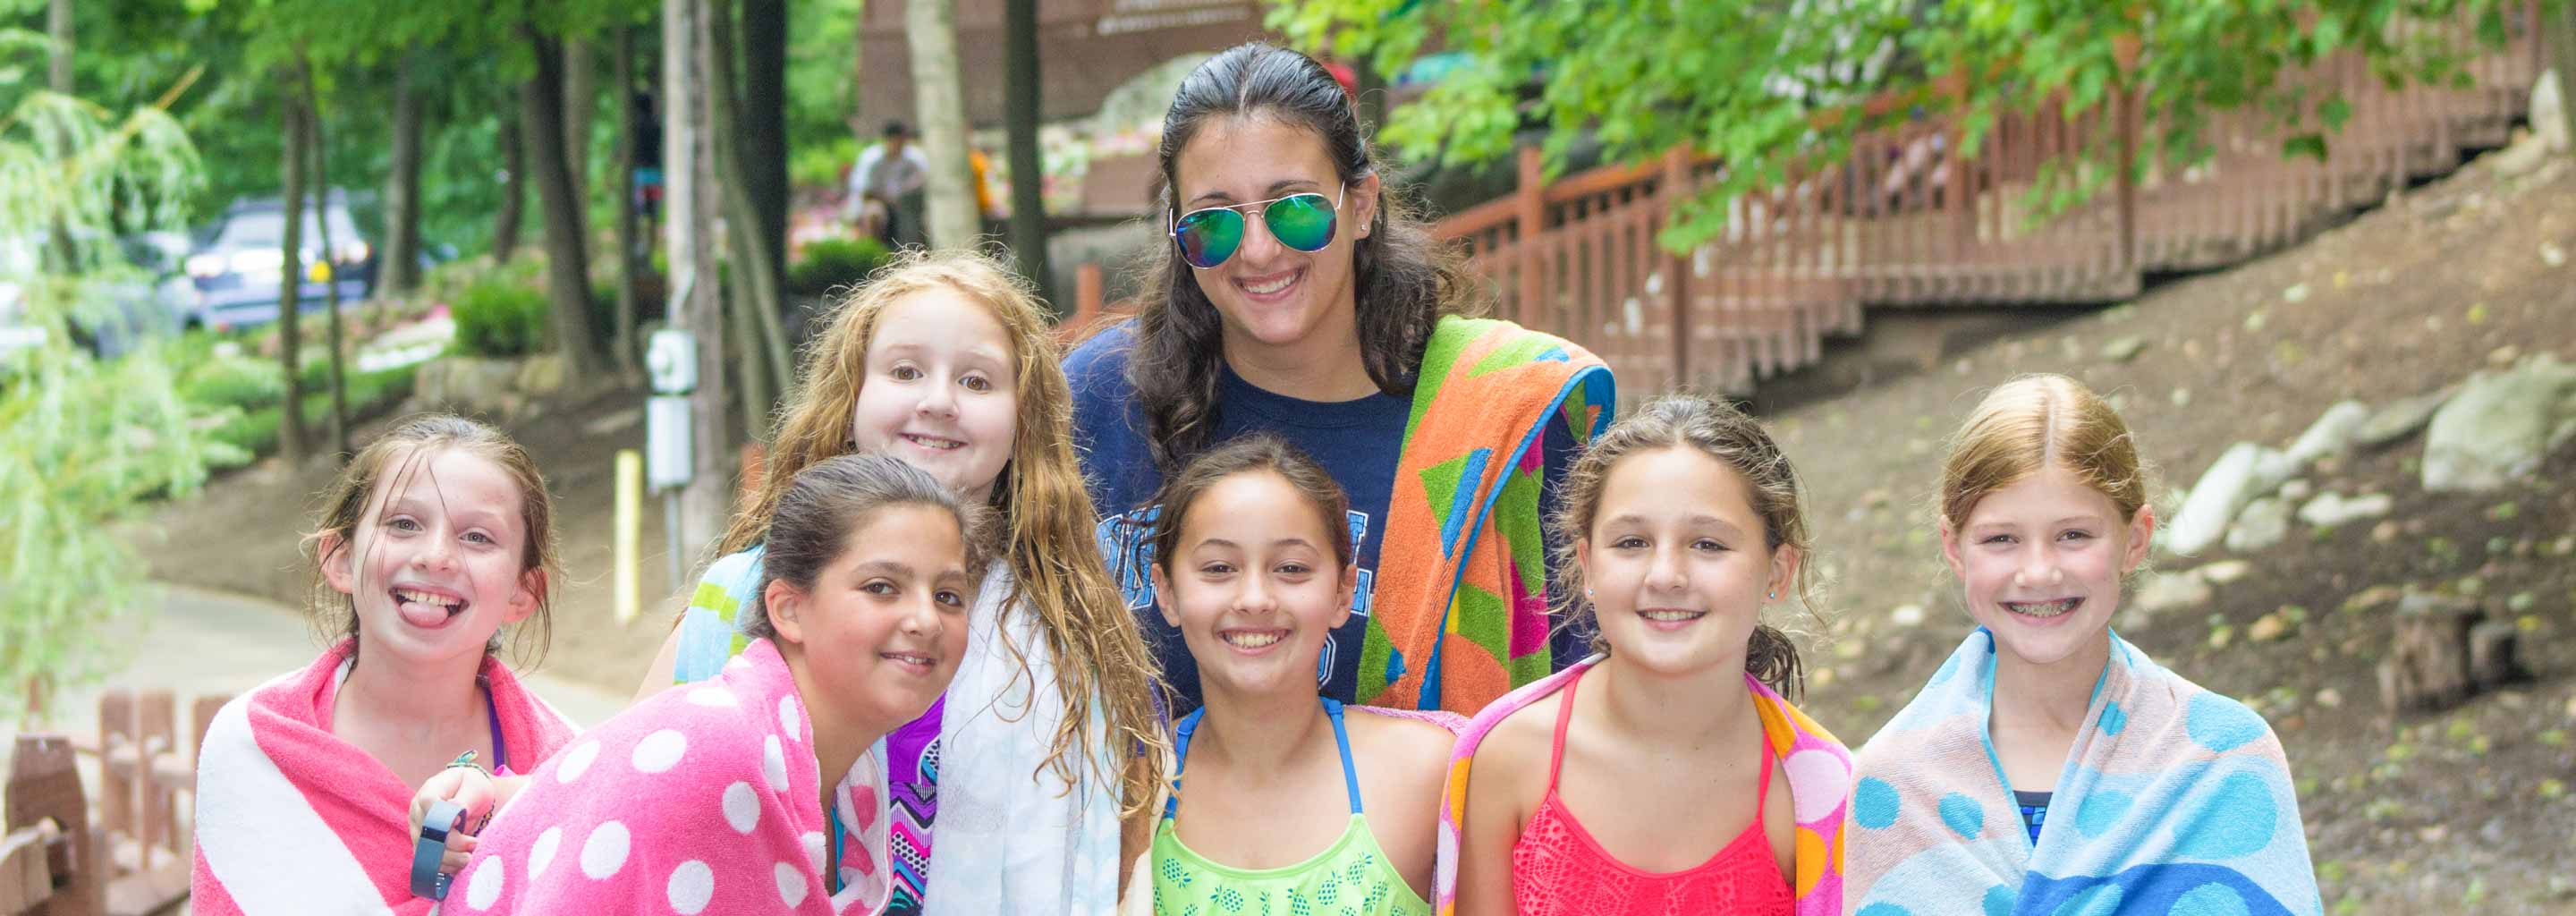 Girls prepare for swim at day camp